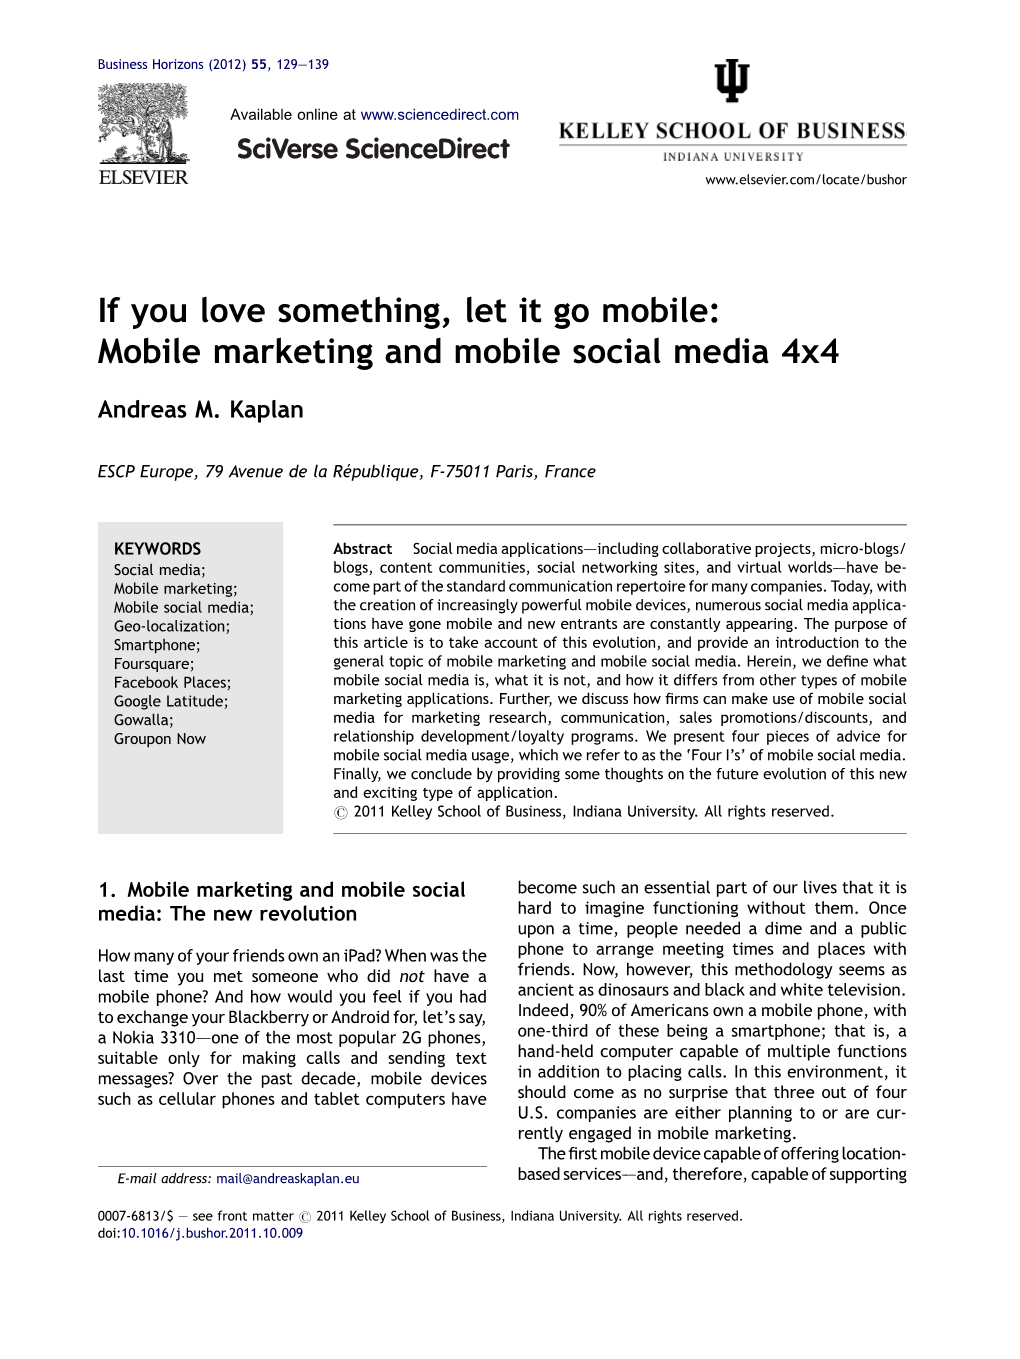 Mobile Marketing and Mobile Social Media 4X4